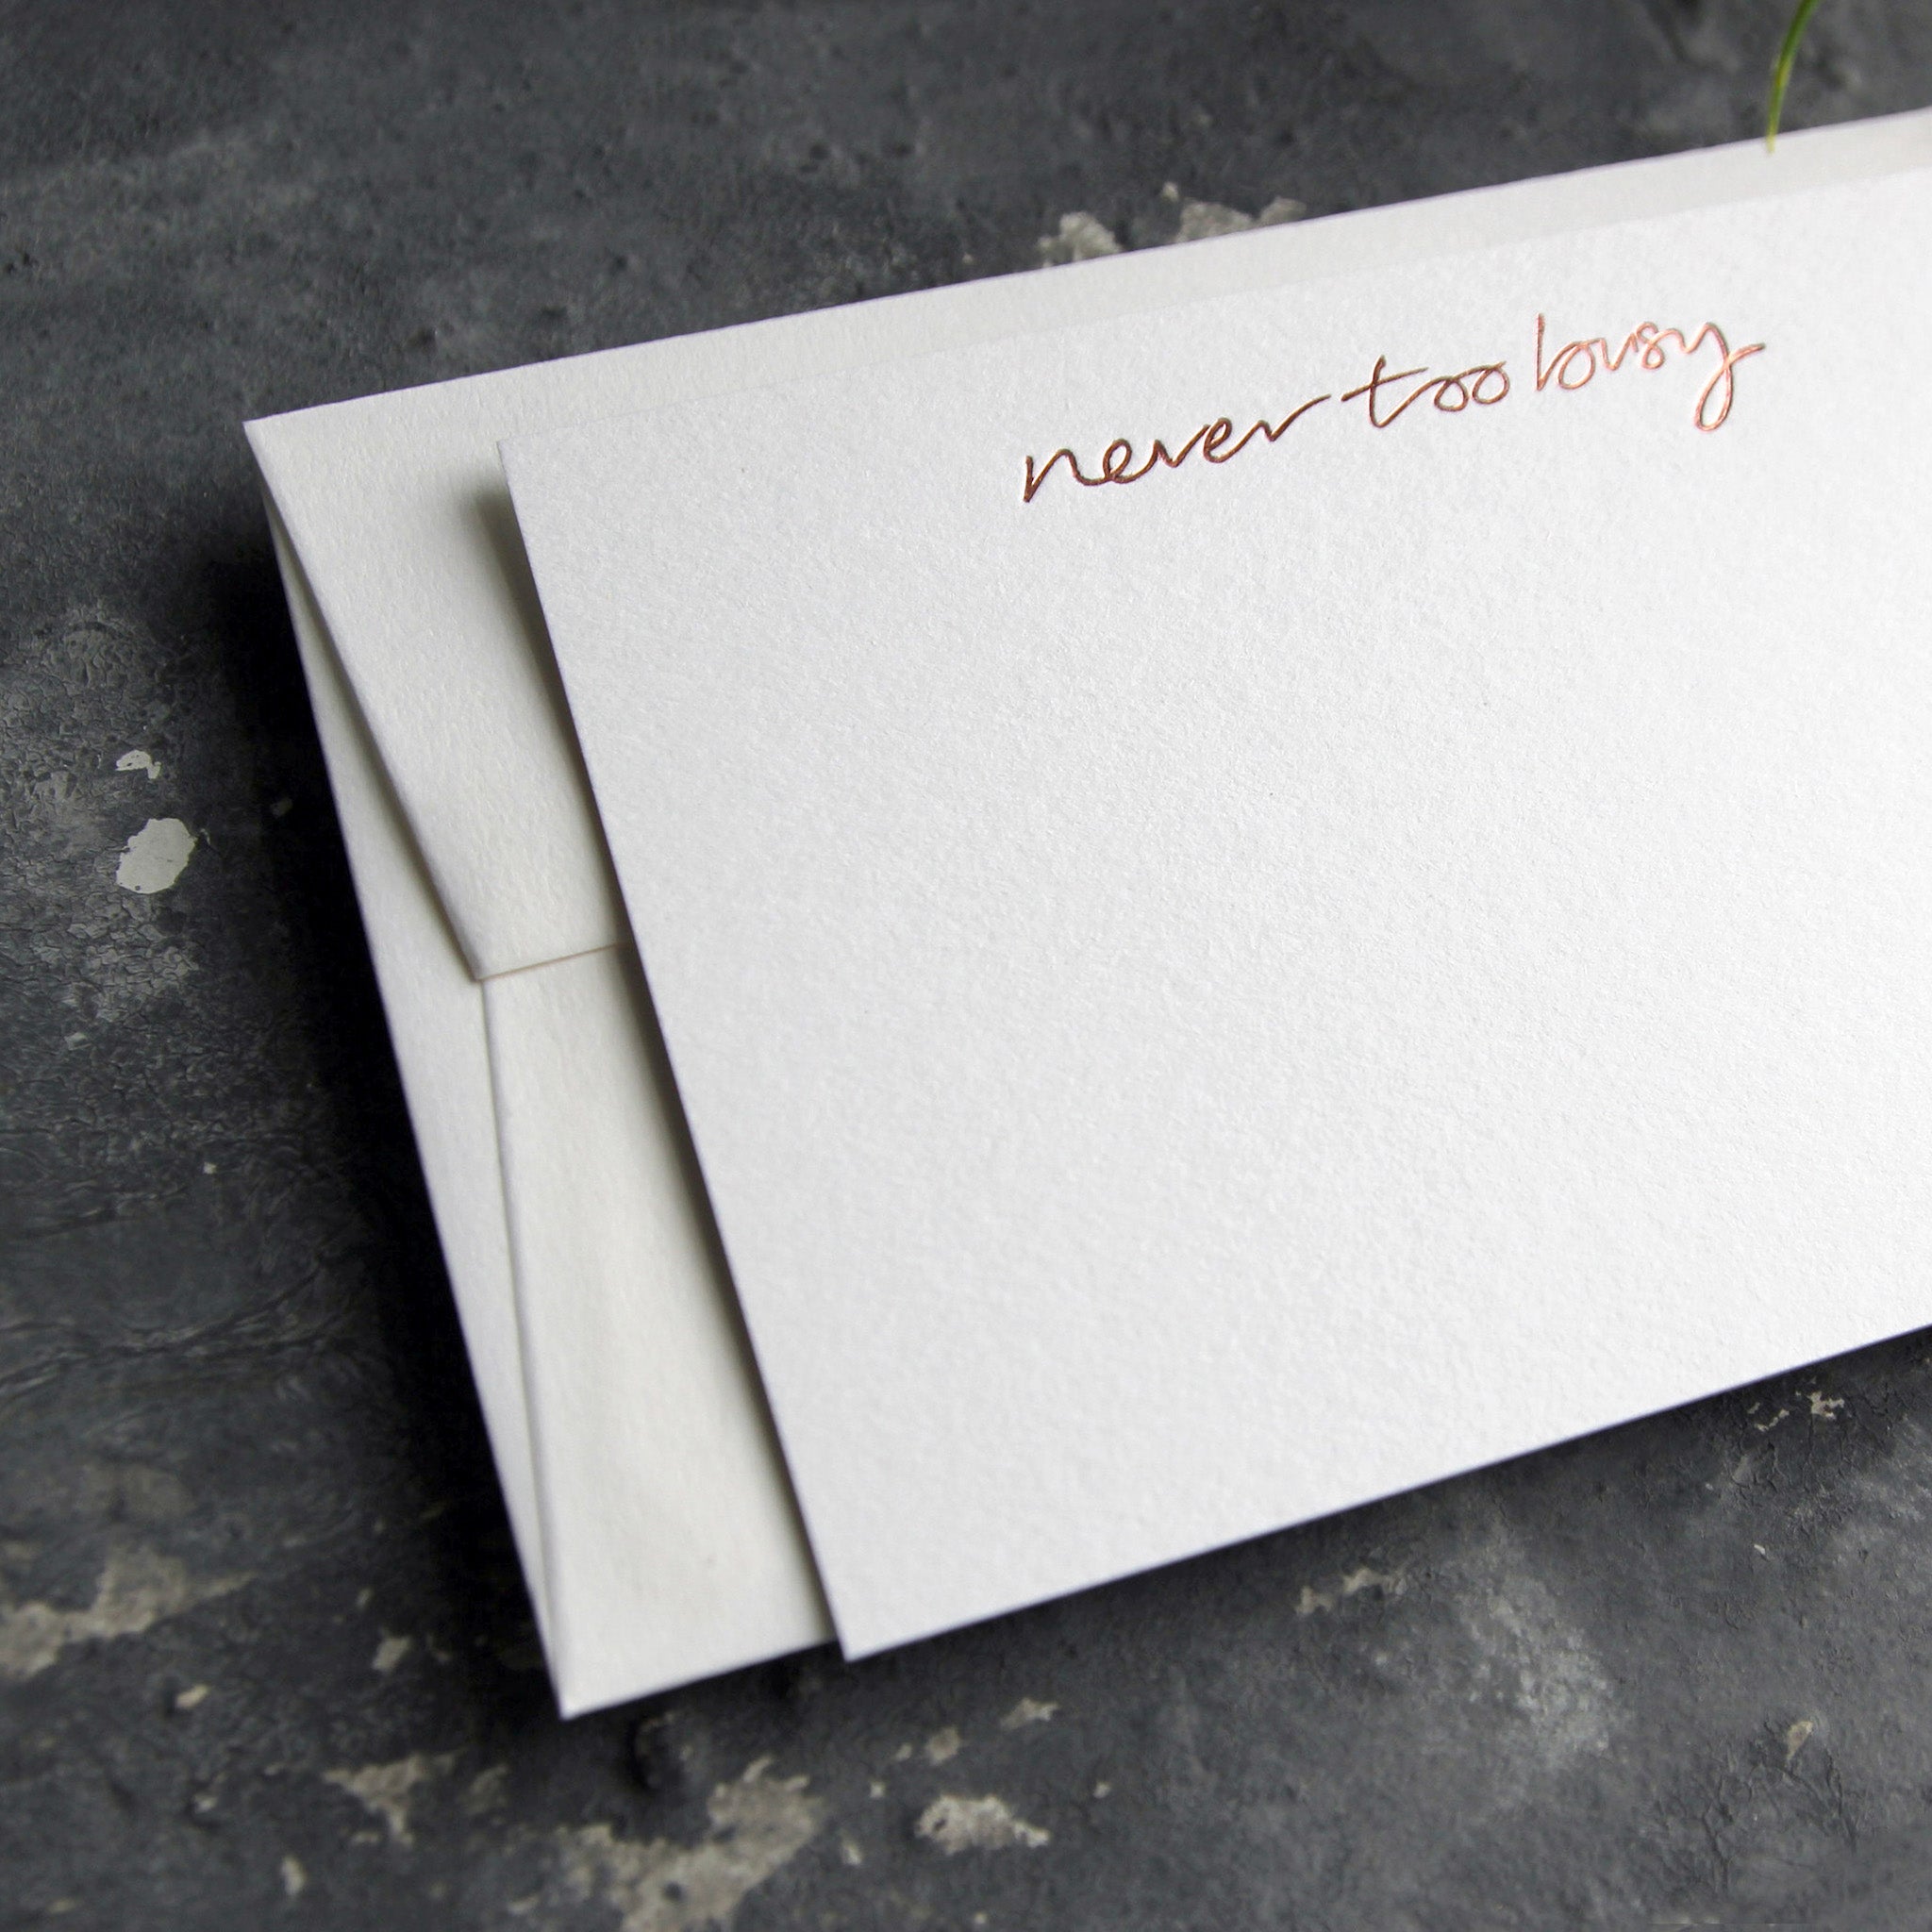 Luxury white notecard and envelope with "Never Too Busy" handwritten on the front and hand printed in rose gold foil on a grey background.